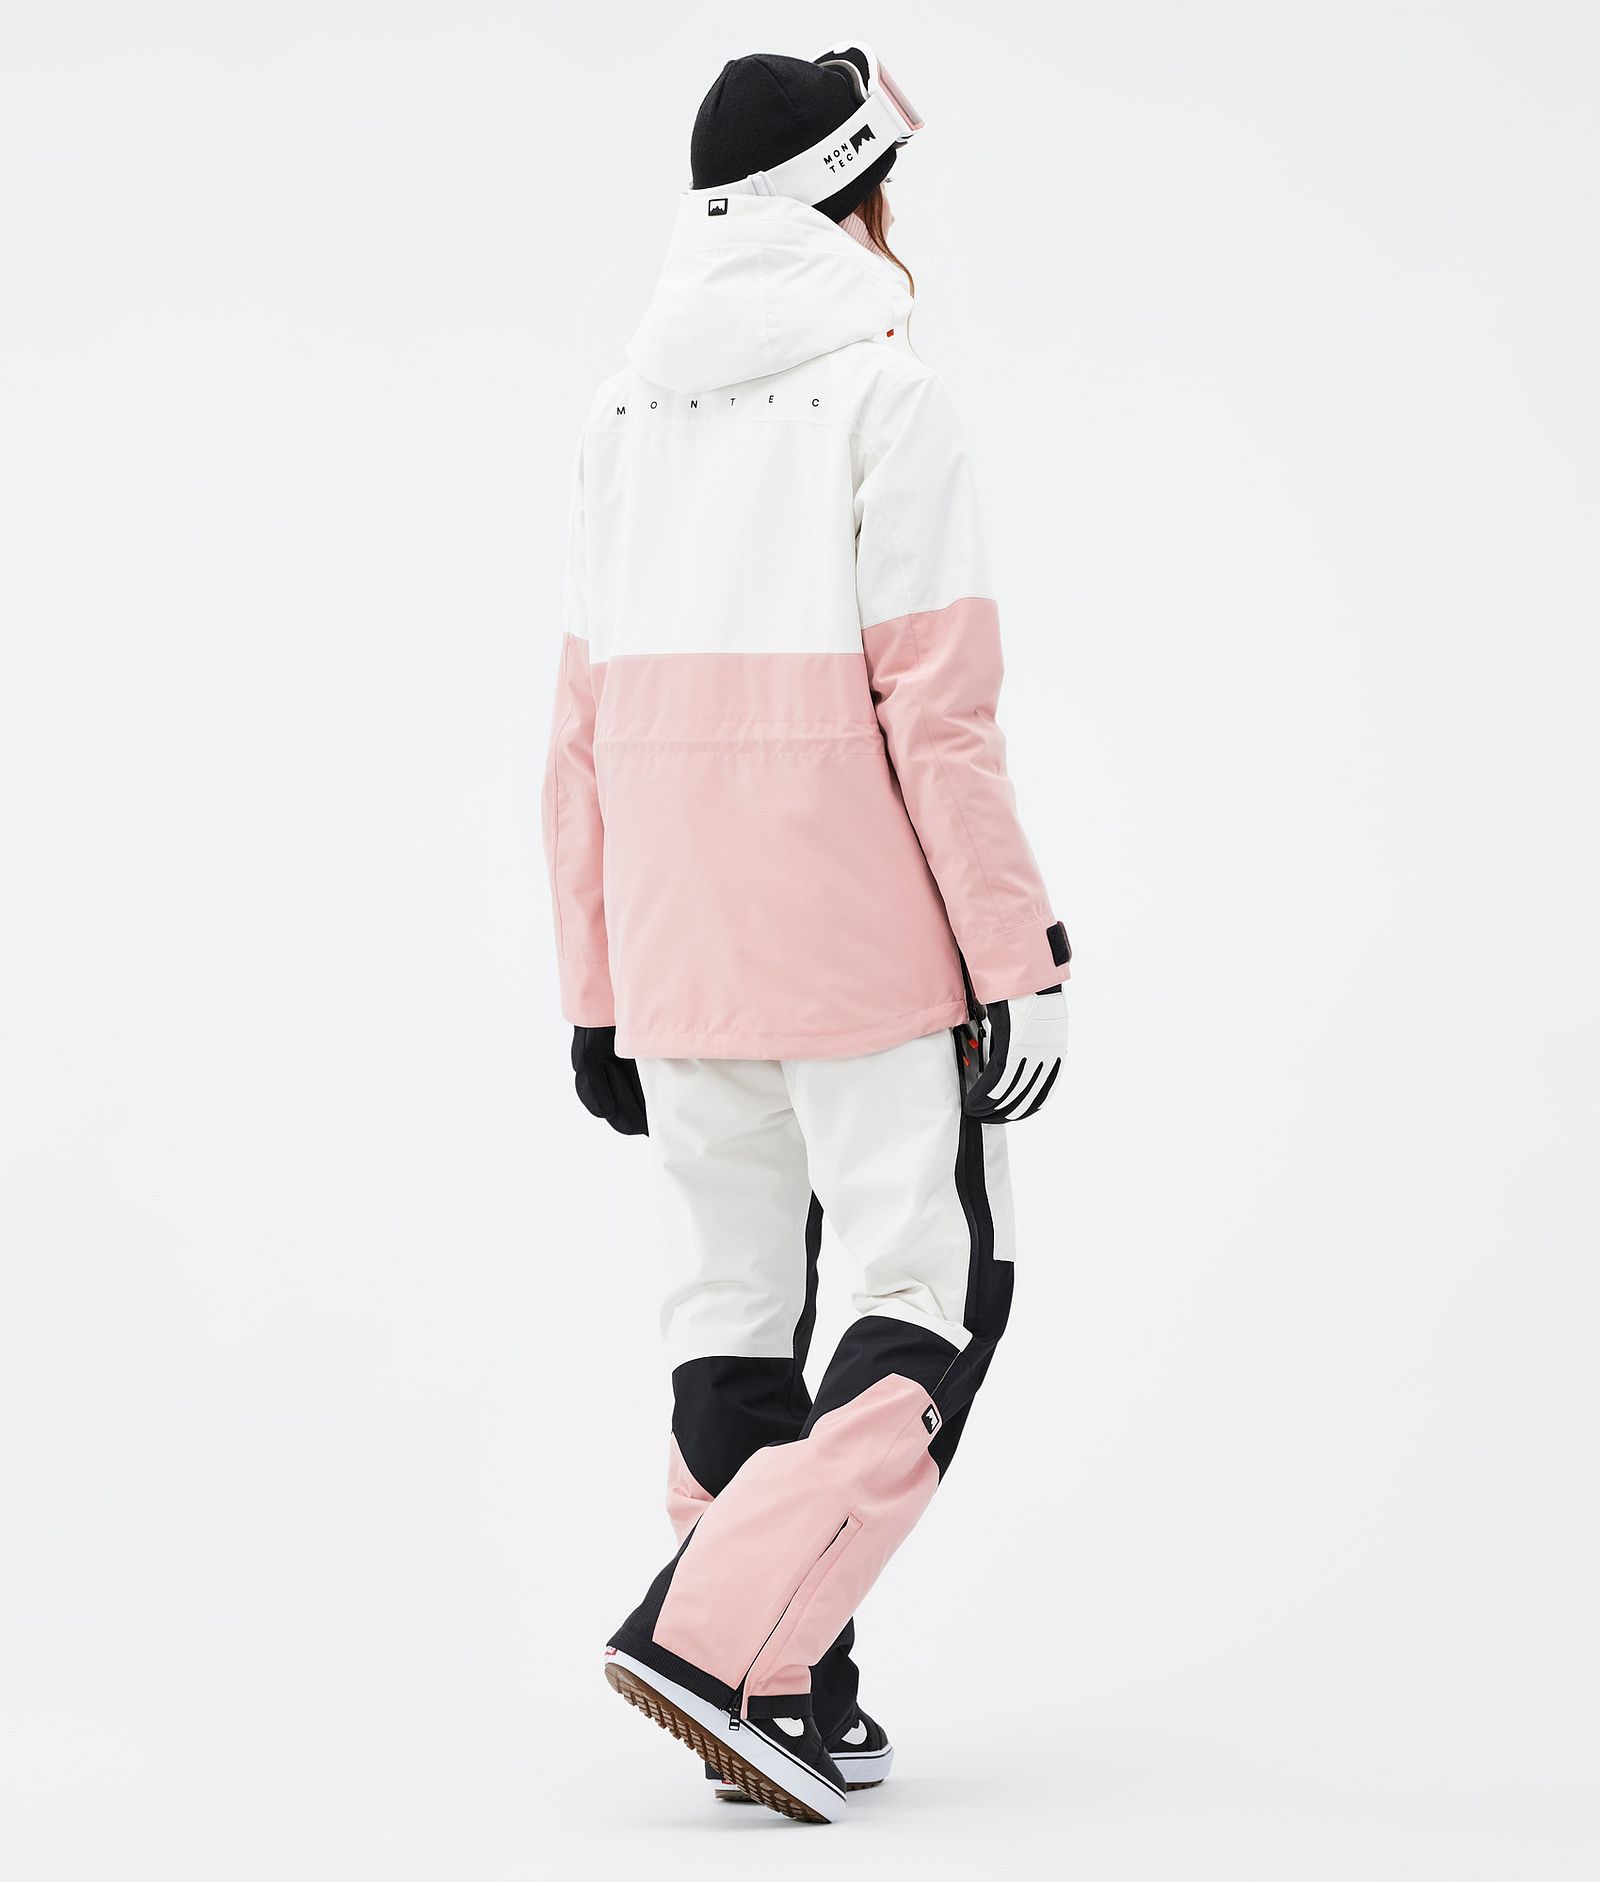 Dune W Outfit Snowboard Donna Old White/Black/Soft Pink